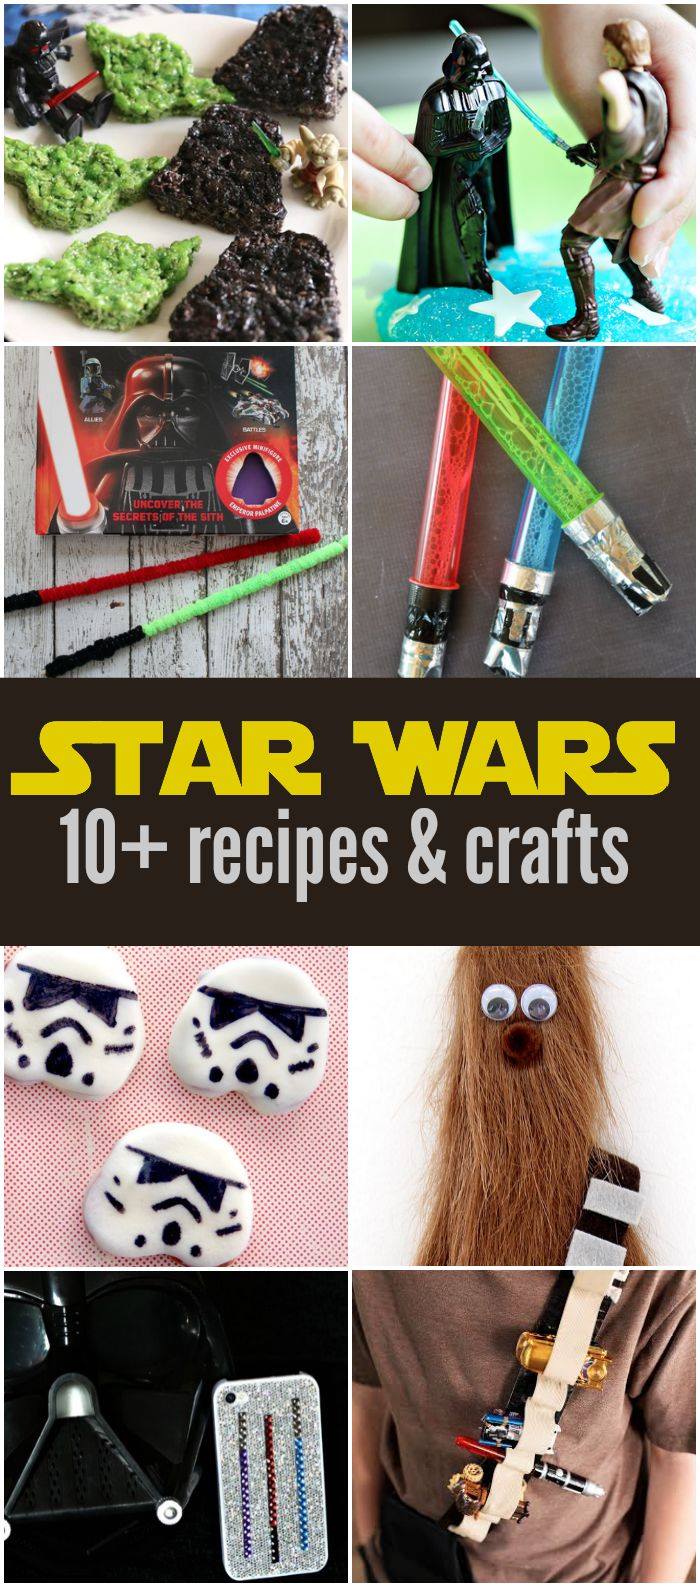 Star Wars Crafts and Recipes